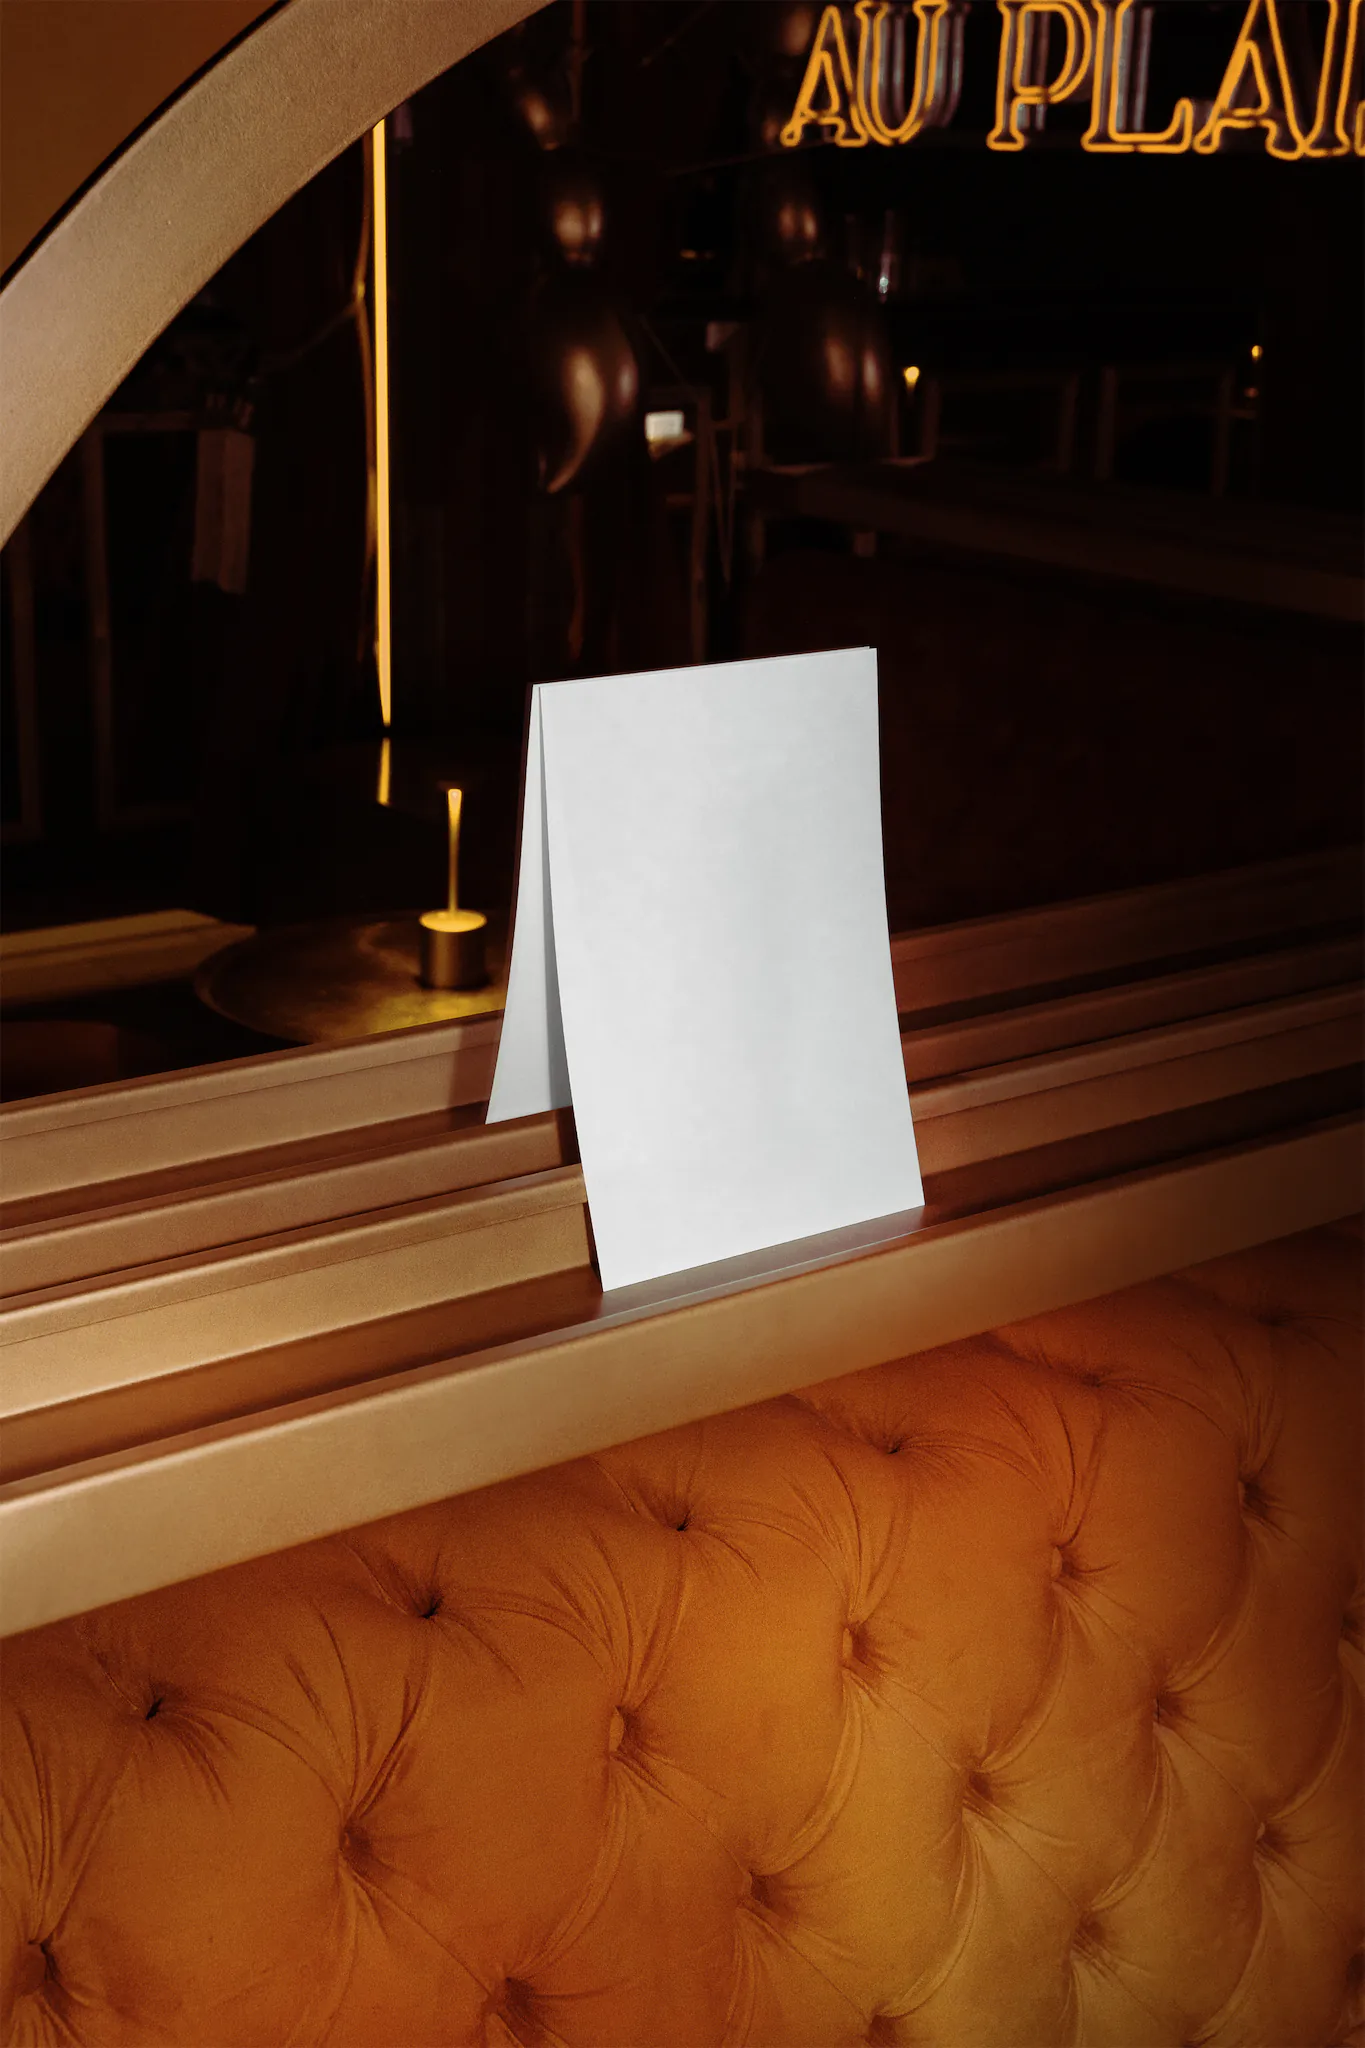 A Format mockup on top of an orange couch in a fancy bar environment